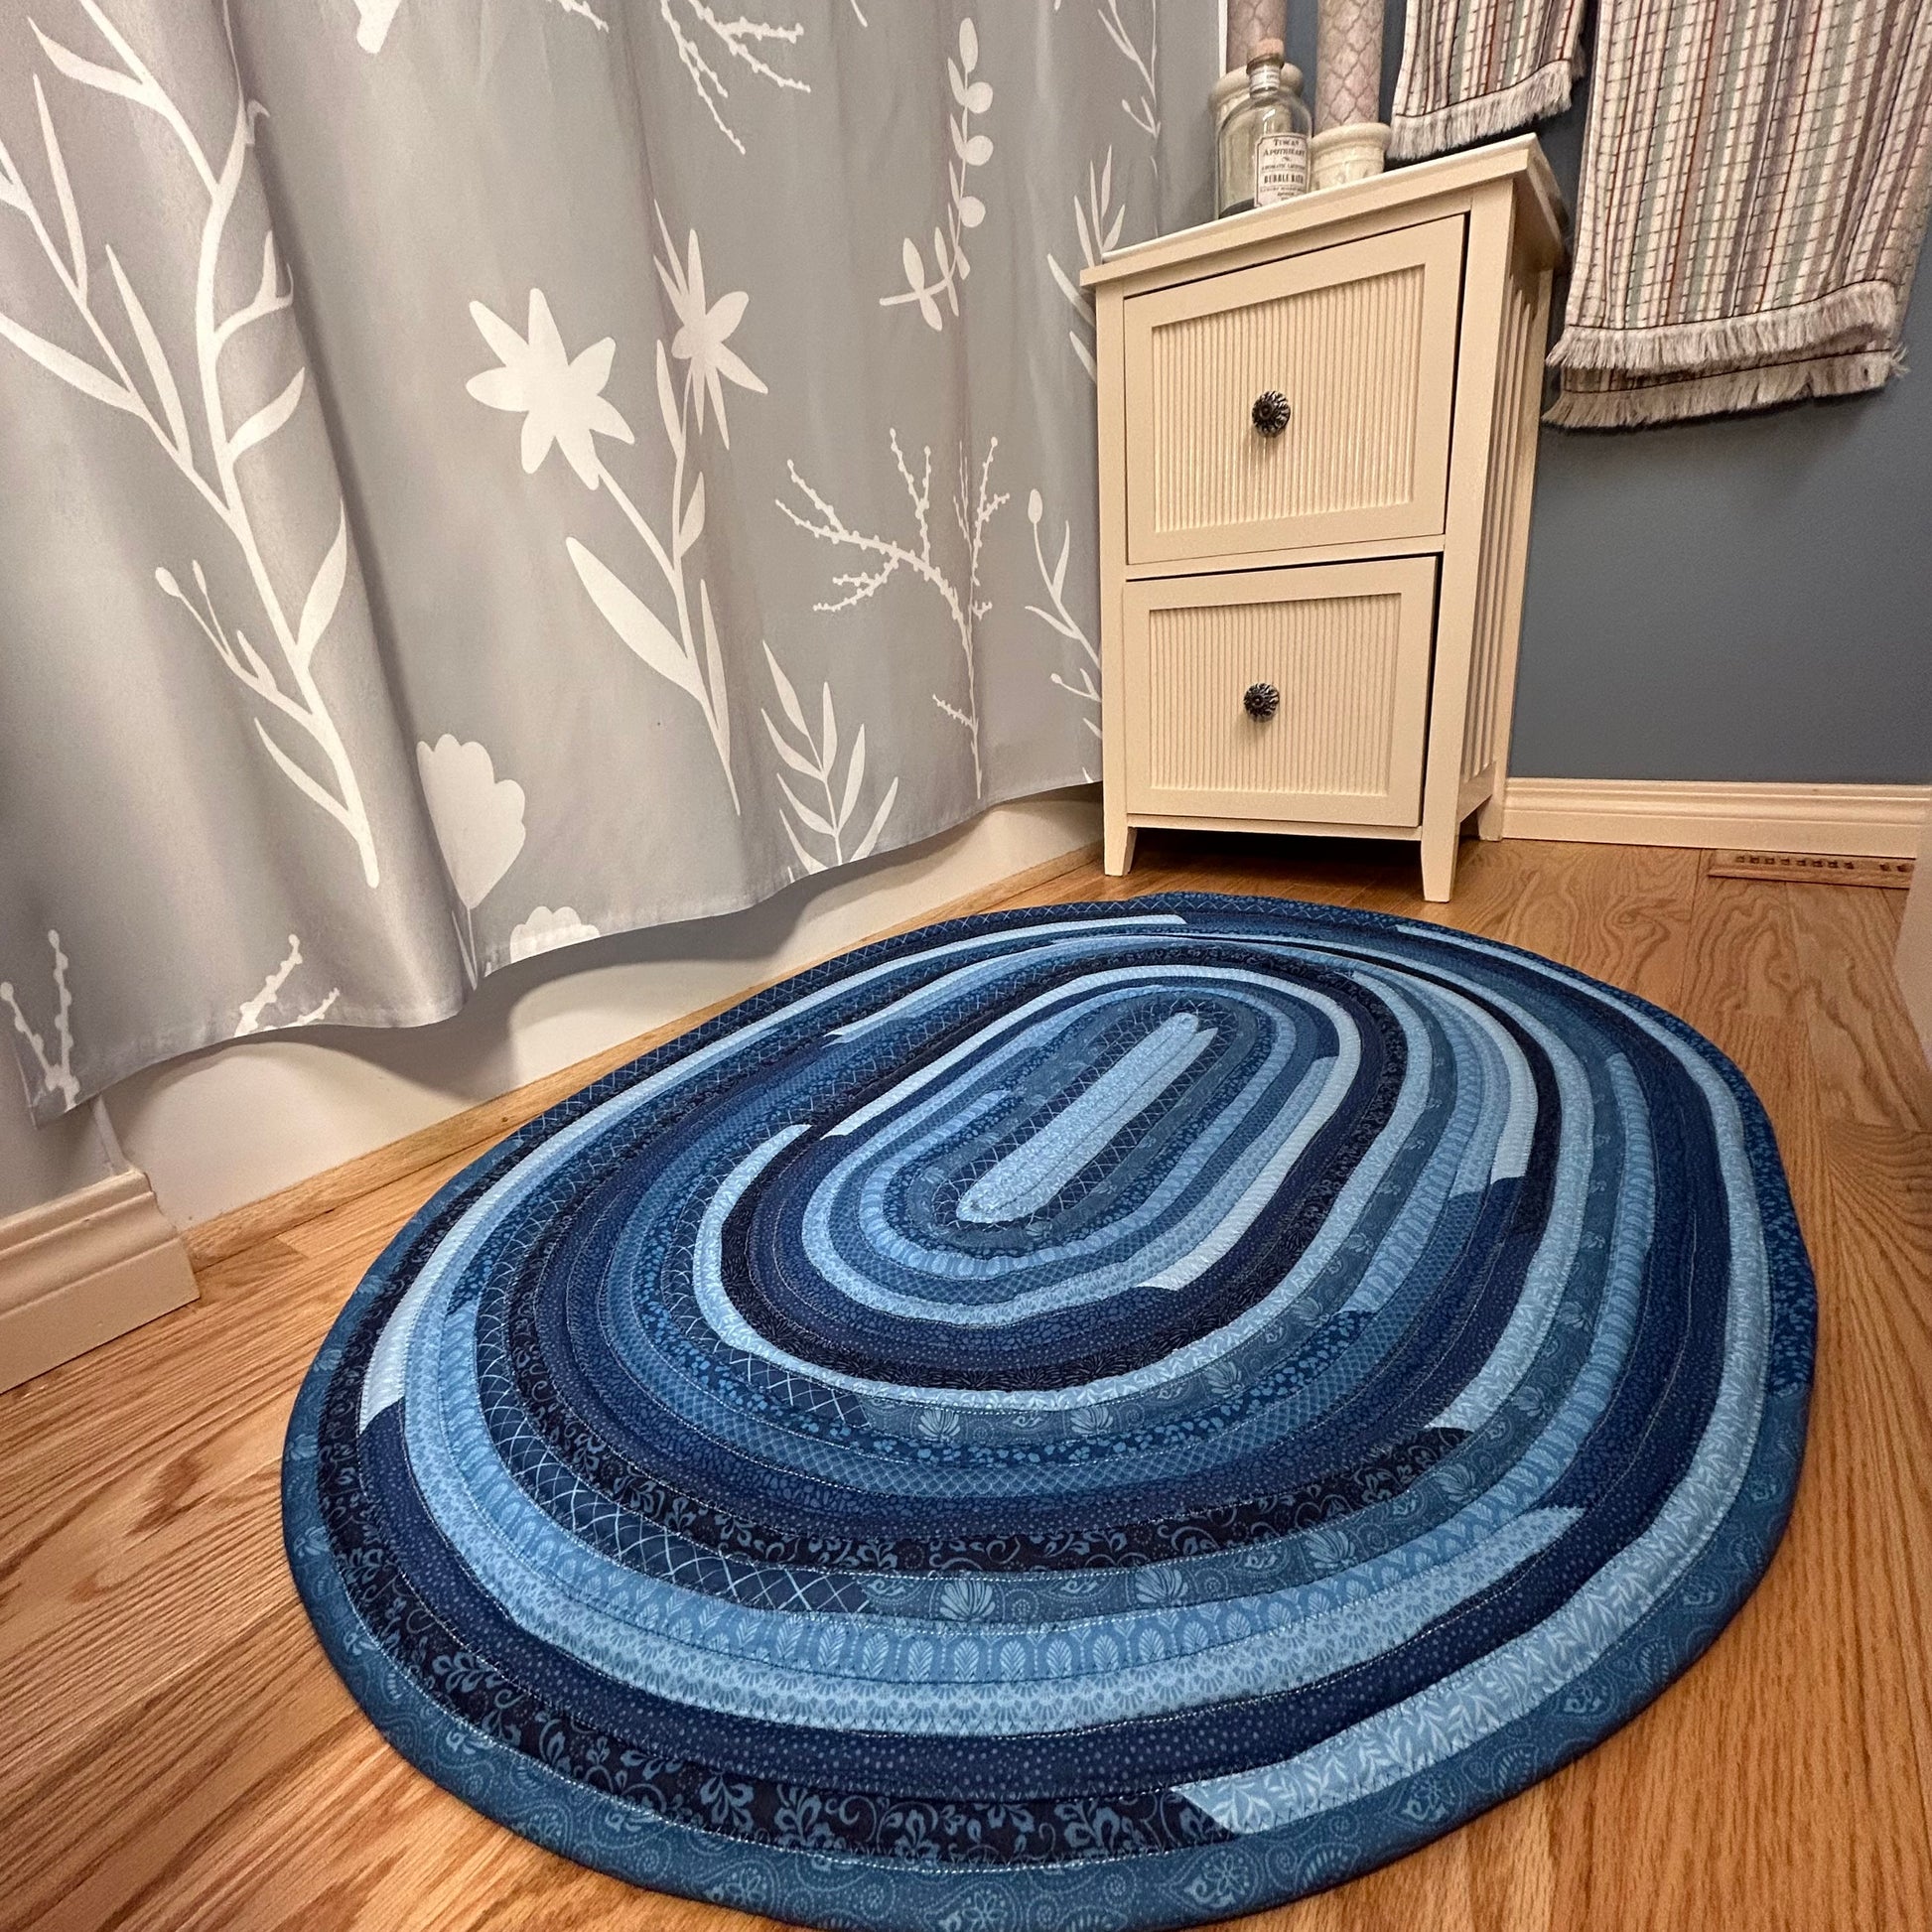 Blue Handmade Jelly Roll Rug for Kitchen. Or use as a bedside rug or luxury bathmat. It's cozy, washable, reversible and made to last. At Home Stitchery Decor we aim to bring beauty and function to home decor just like grandma used to make!